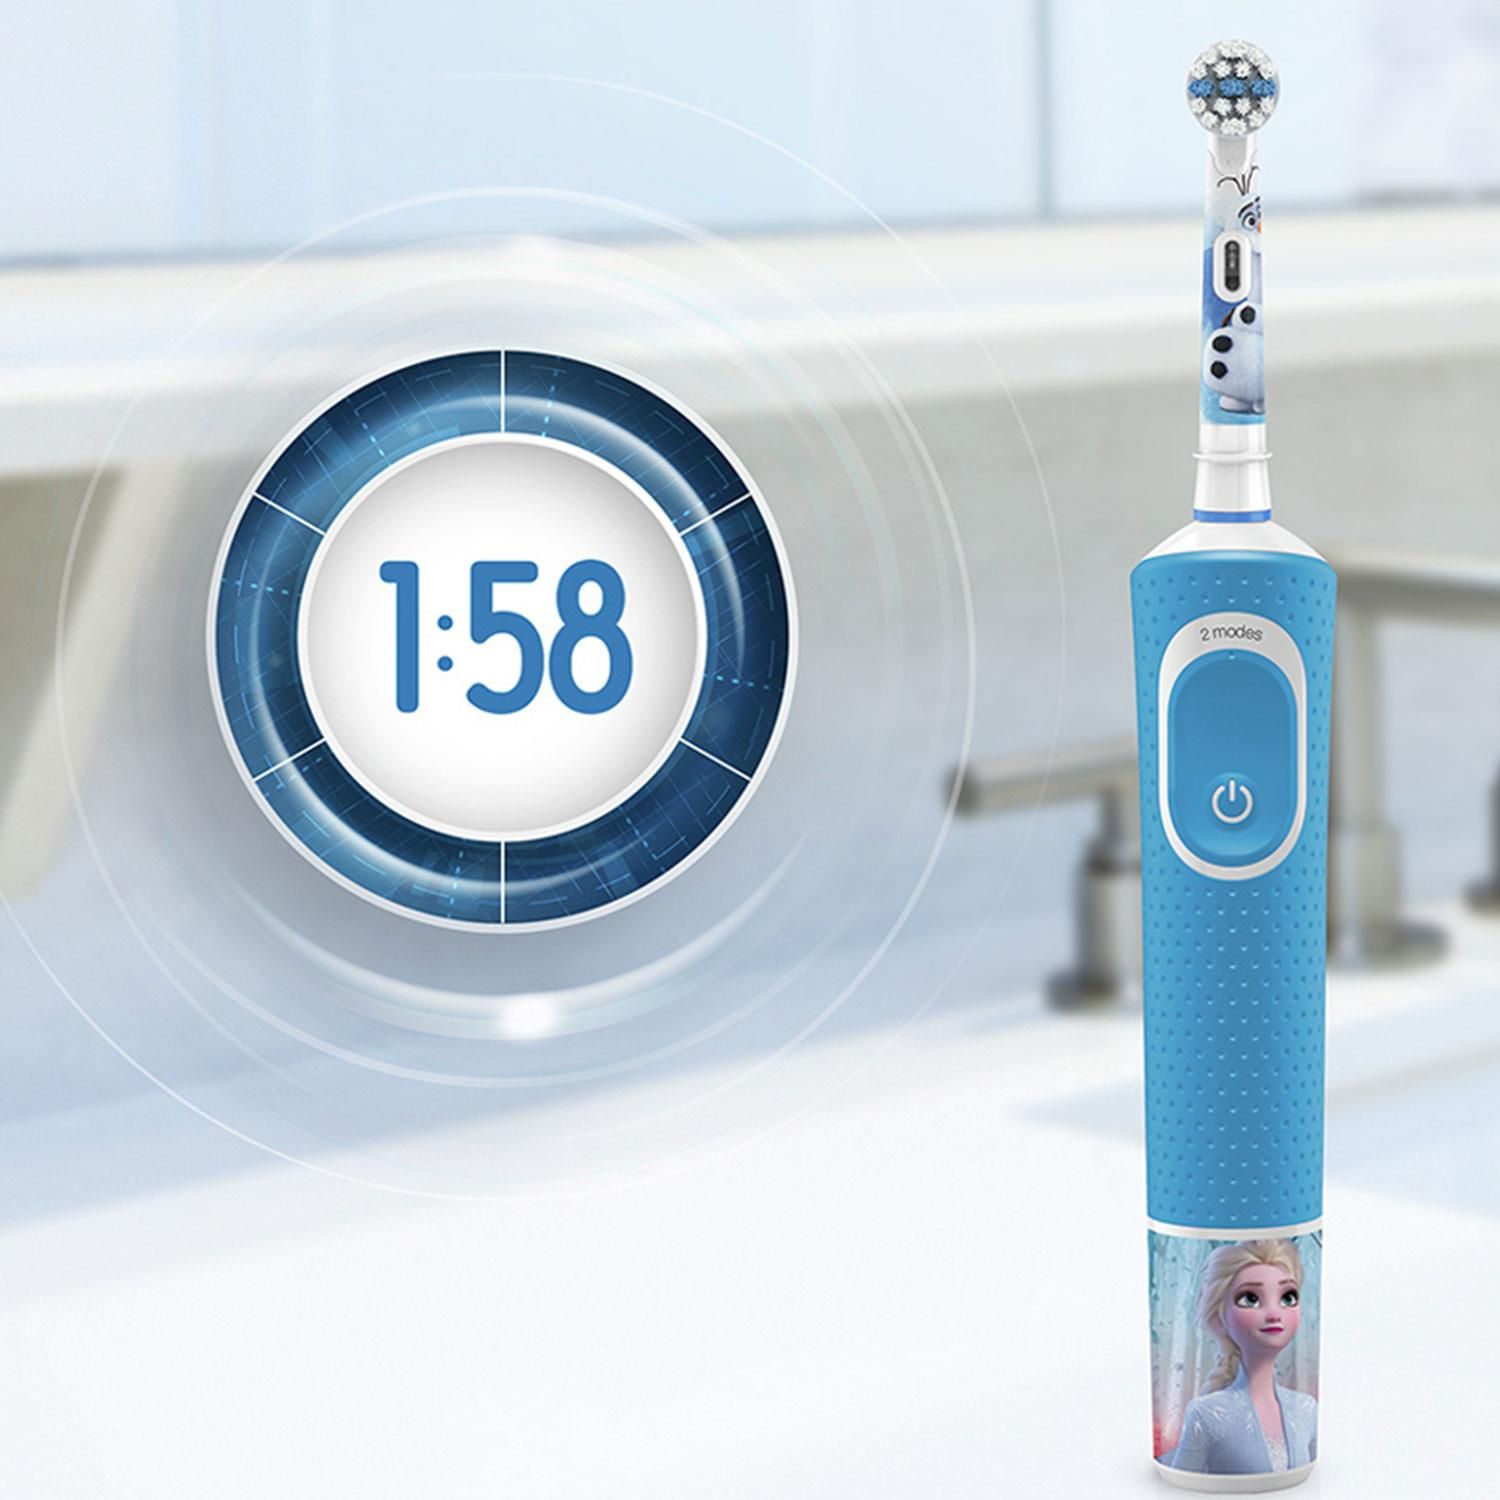 Oral-B Power 3+ Disney Frozen II Electric Toothbrush Giftset with Travel Case.  The Oral-B Kids Electric Toothbrush for ages 3+ entertains kids with Disney's Frozen II film while offering gentle and effective cleaning with a toothbrush recommended by Oral-B dentists. With a unique brushing function for delicate baby teeth, this toothbrush gently cleanses children's teeth. It removes more plaque from a simple manual toothbrush. Includes four stickers from Disney's Frozen film for decorating the handle.

Key Features:  

  Specially designed to be soft with baby teeth
  Round toothbrush head ideal for small mouths
  Particularly soft fibres that are soft with the gums
  Suitable for ages 3+
  Decorate the brush handle with 4 stickers from Disney's Frozen II
  Works with the Oral-B Disney Magic Timer application
  Rechargeable battery for 8 days
  Encourages brushing for 2 minutes with the built-in timer

The Box contains: 1x electric toothbrush, 4x sticker for the body of the brush, 1x replacement stages powerhead, 1x travel case with a motif, 1x charging station